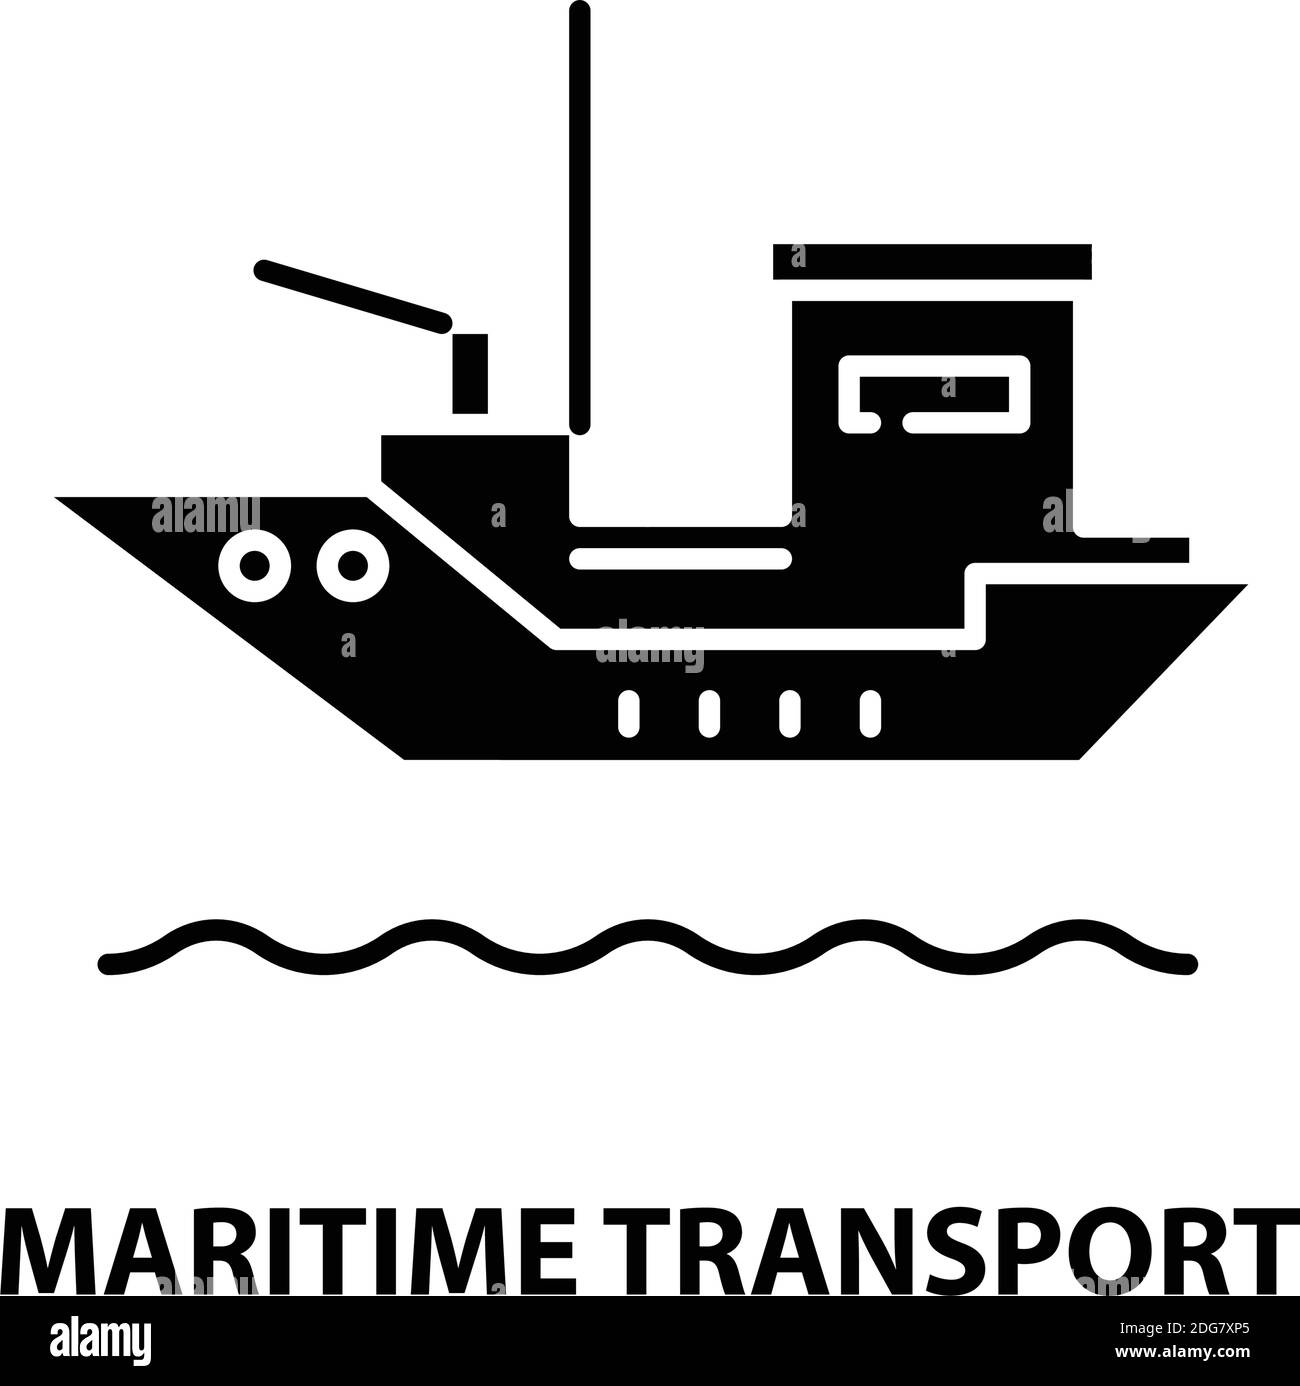 maritime transport icon, black vector sign with editable strokes, concept illustration Stock Vector